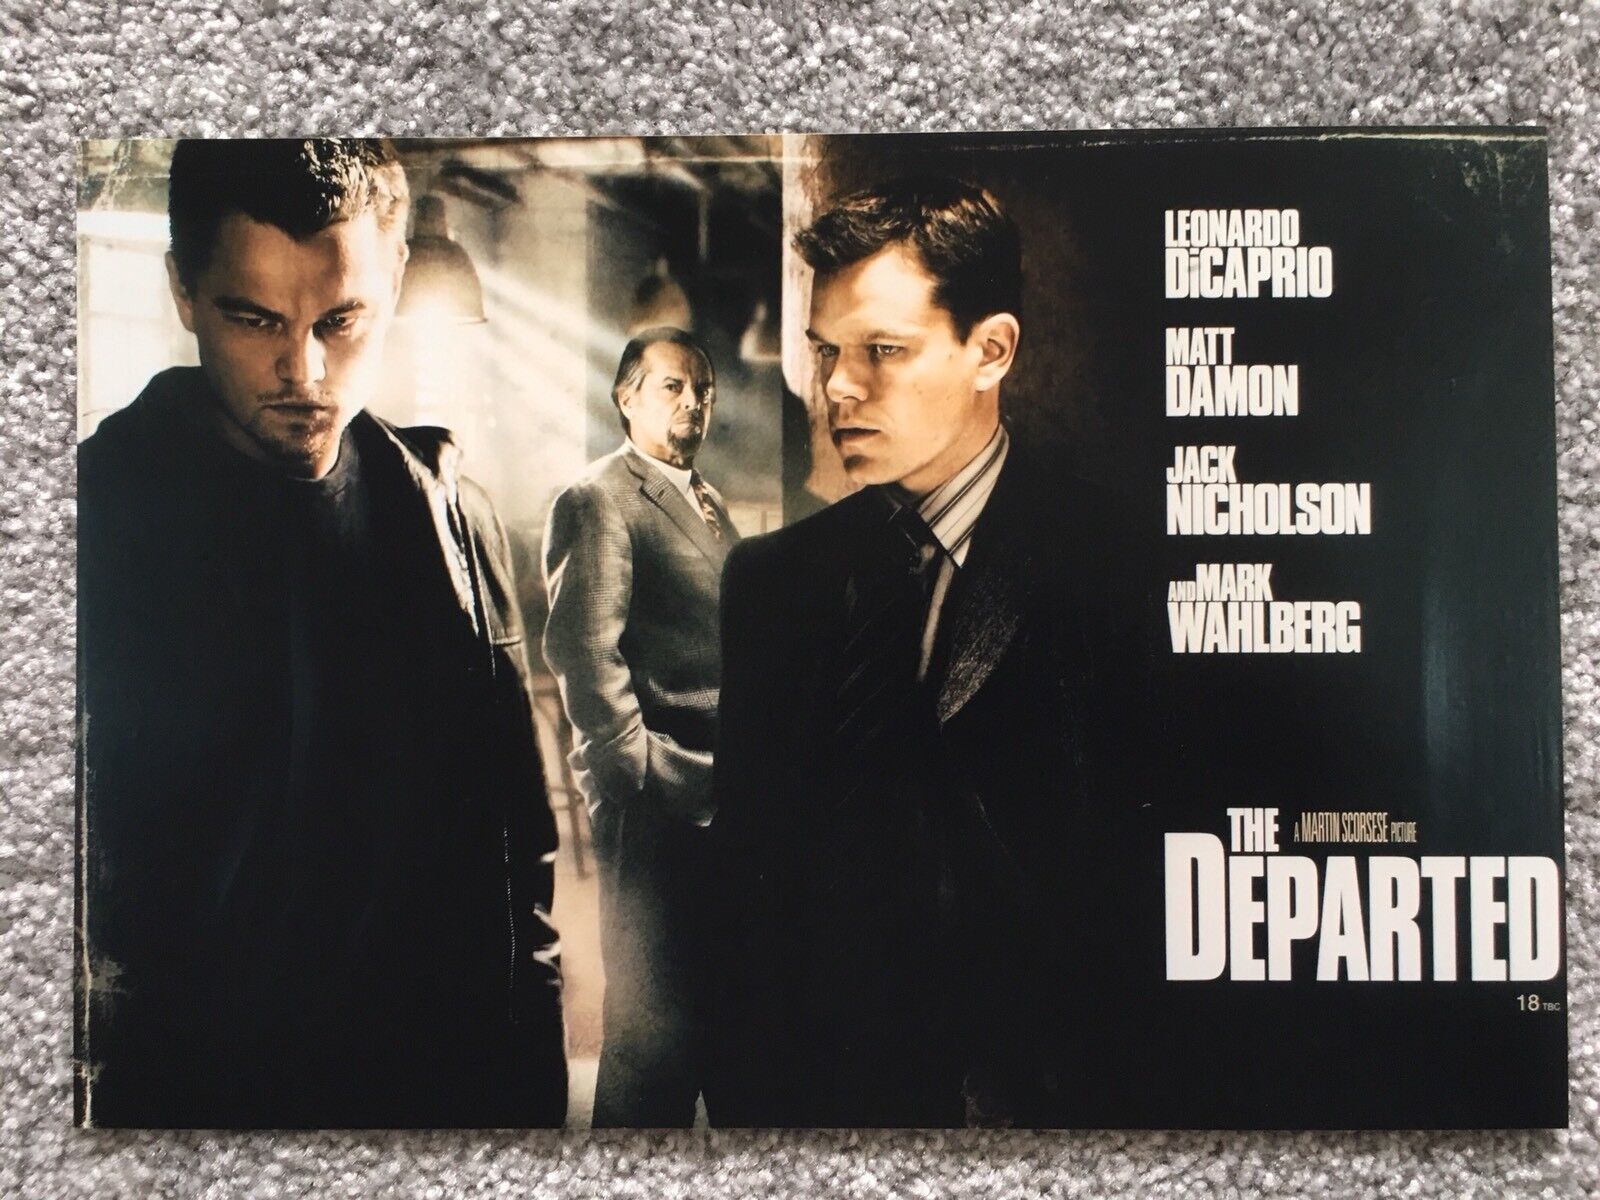 The Departed Movie 12x8 Poster Photograph / Photo. Dicaprio & Damon | eBay